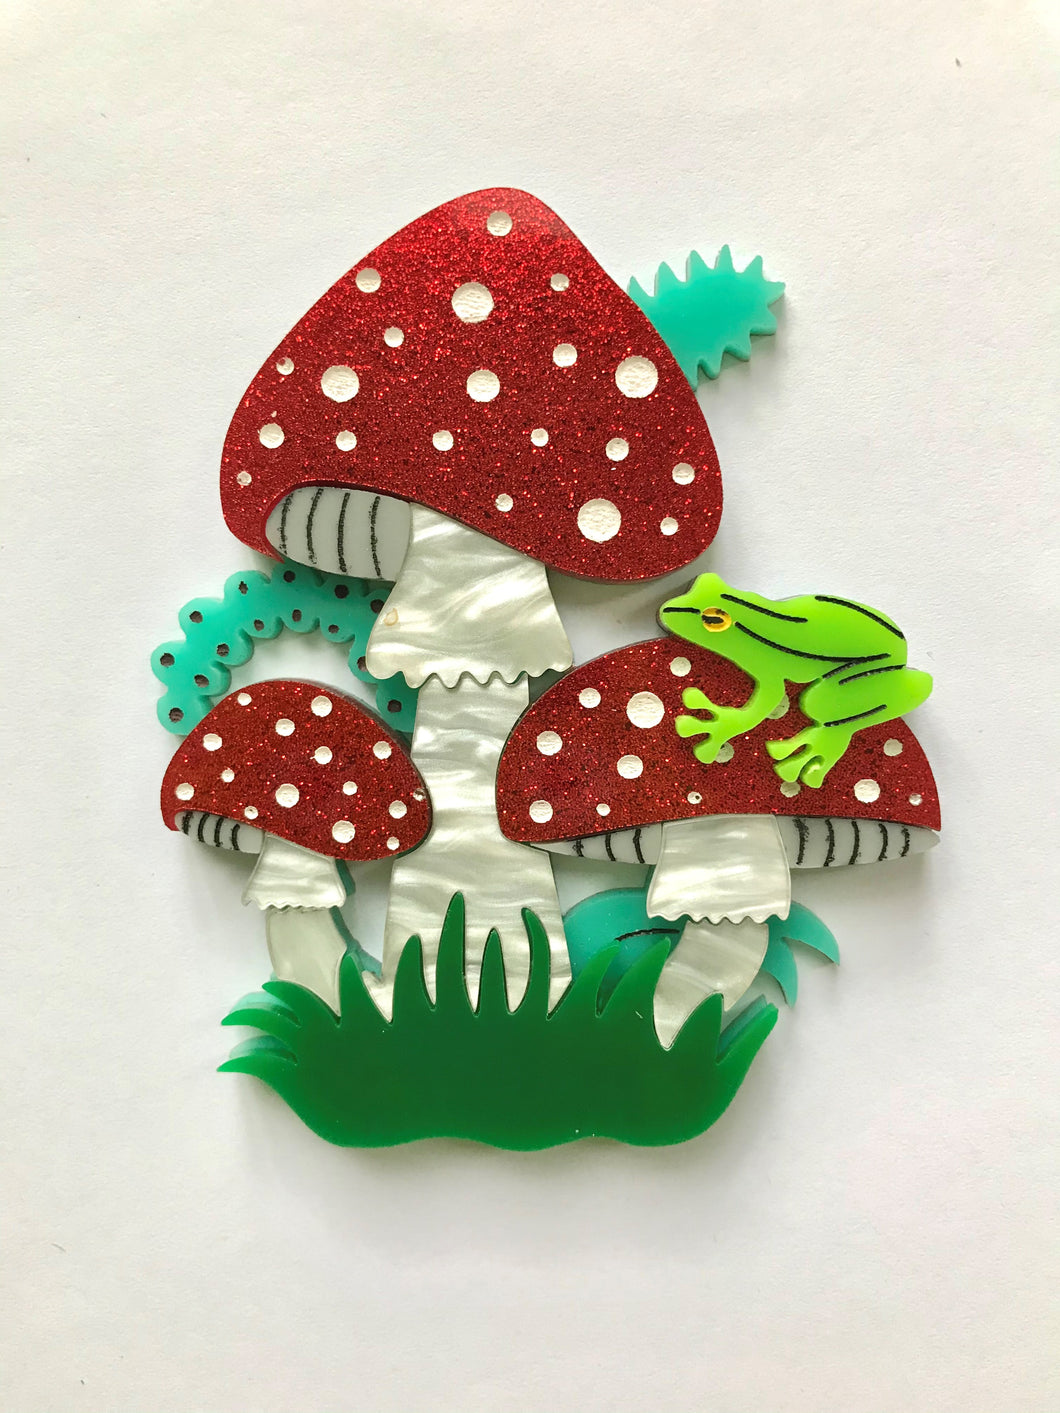 Large Magical Toadstool Brooch in Handpainted Red Glitter